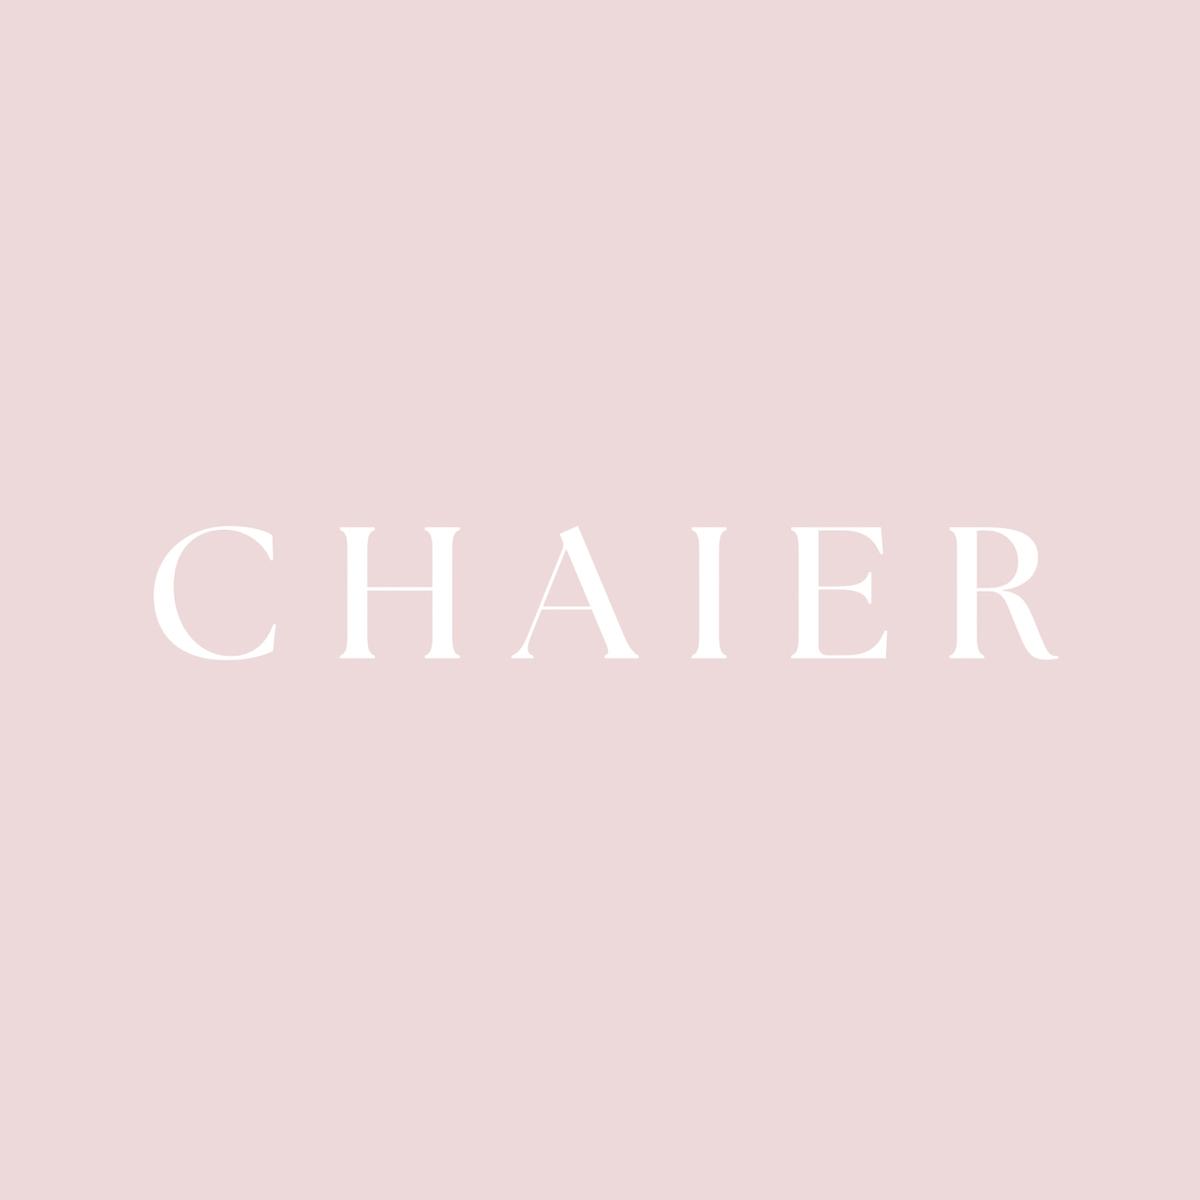 Chaier's images